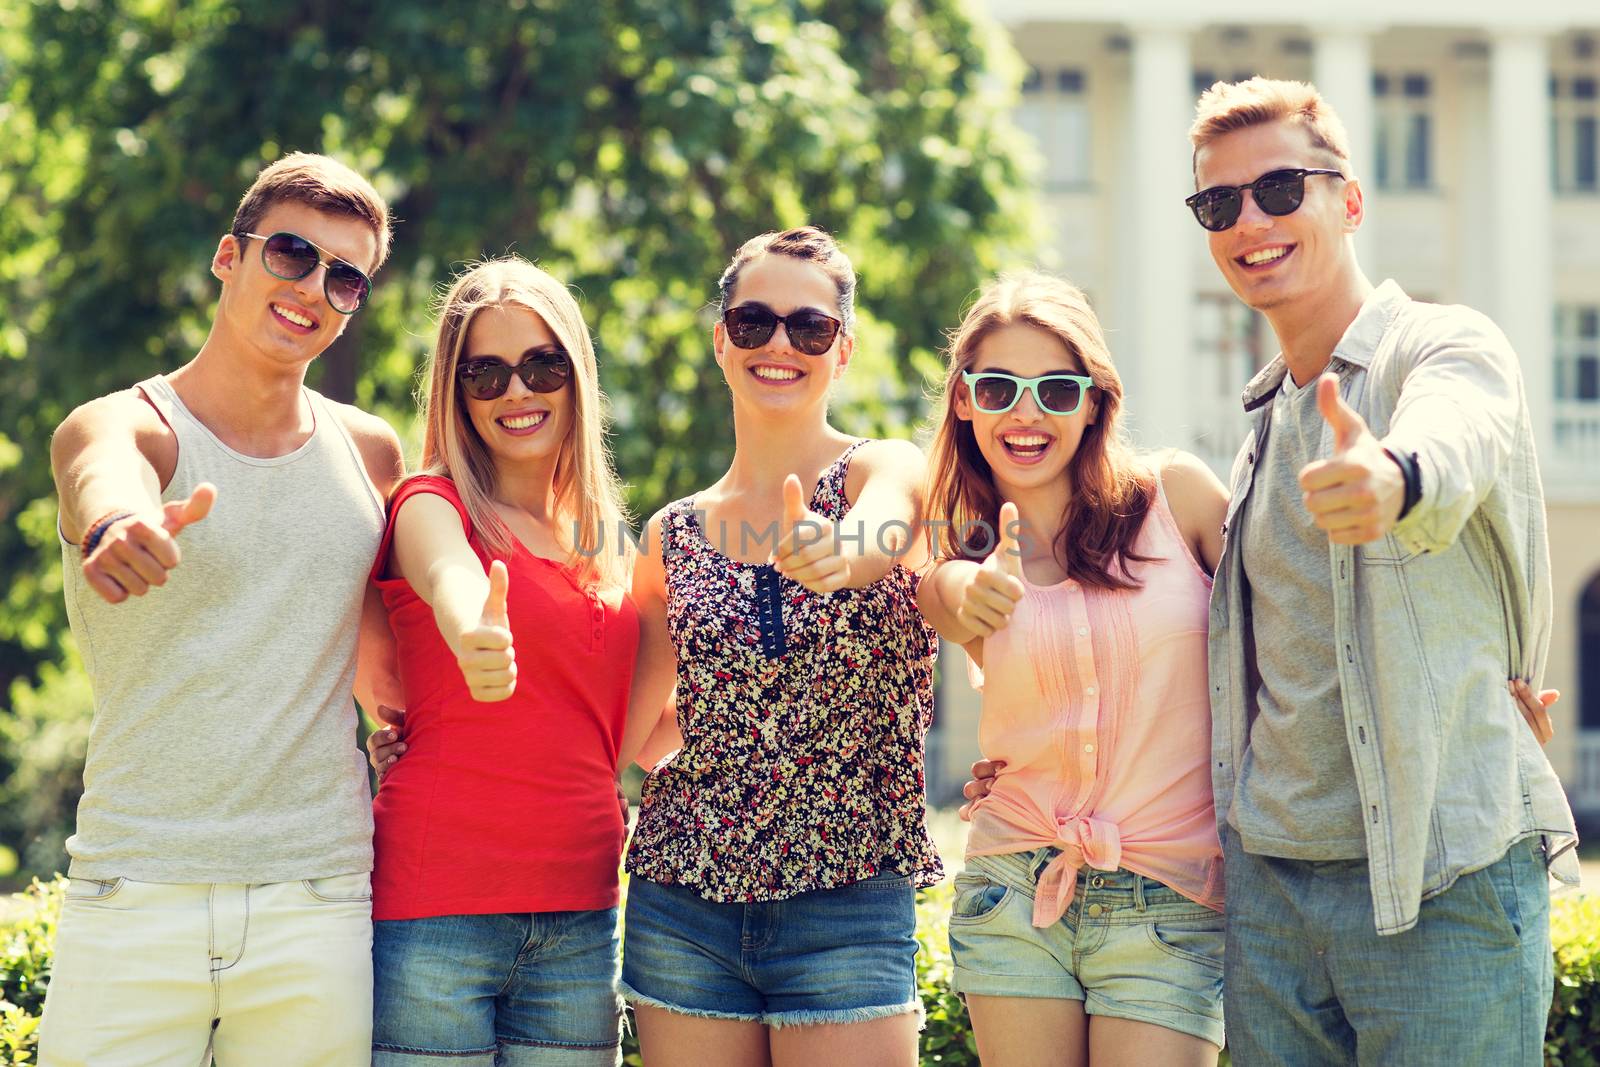 friendship, leisure, summer, gesture and people concept - group of smiling friends showing thumbs up outdoors